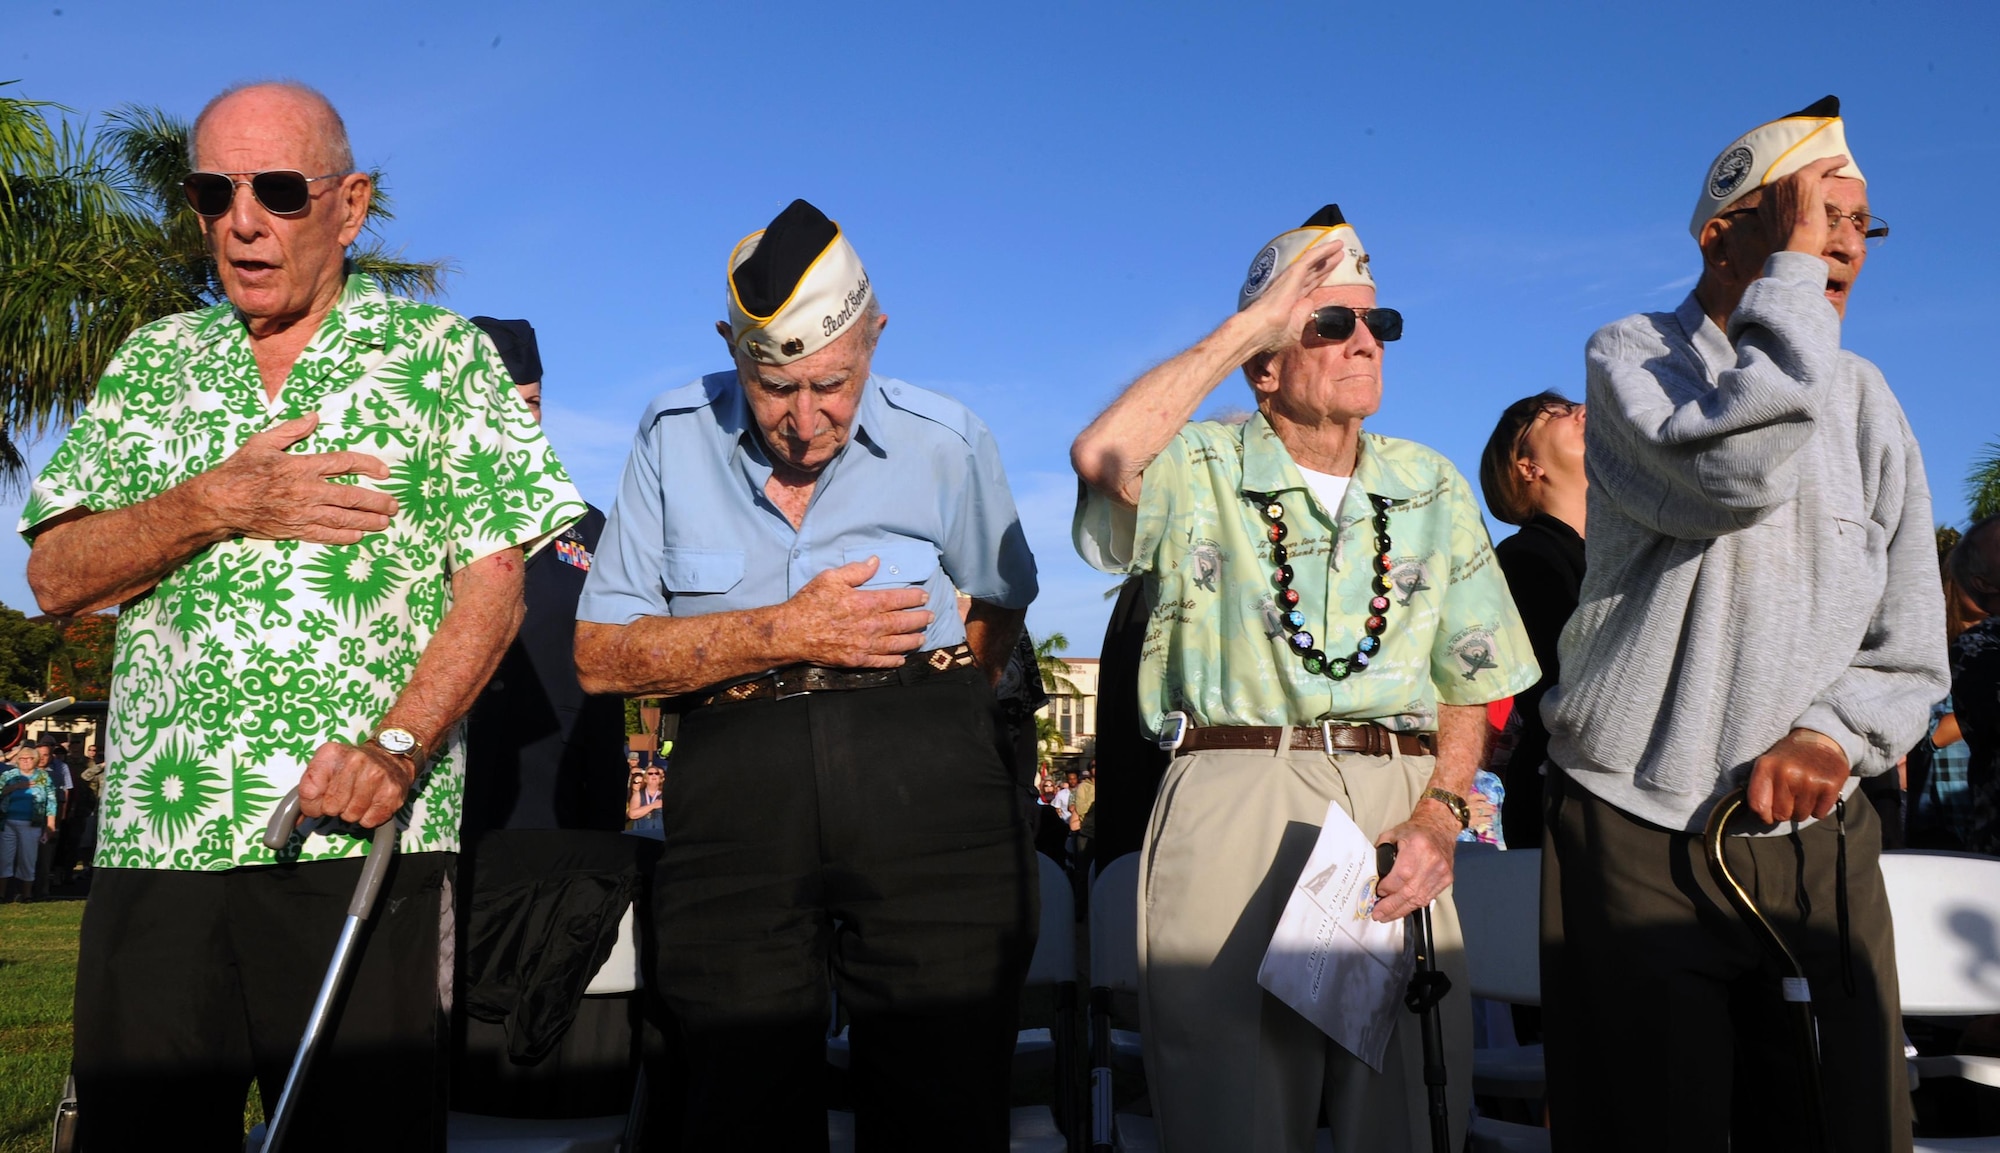 Survivors of the attacks on Pearl Harbor Naval Station and Hickam Field stand during the singing of the national anthem during the 75th Commemoration of the Dec. 7, 1941 attack on Hickam Field ceremony  Dec. 7, 2016, at Joint Base Pearl Harbor-Hickam, Hawaii. The attacks on seven bases throughout Oahu precipitated America's entry into World War II, and the annual commemoration ceremony is designed to foster reflection, remembrance, and understanding for those affected by the events that took place 75 years ago. (U.S. Air Force photo by Tech. Sgt. Nathan Allen)